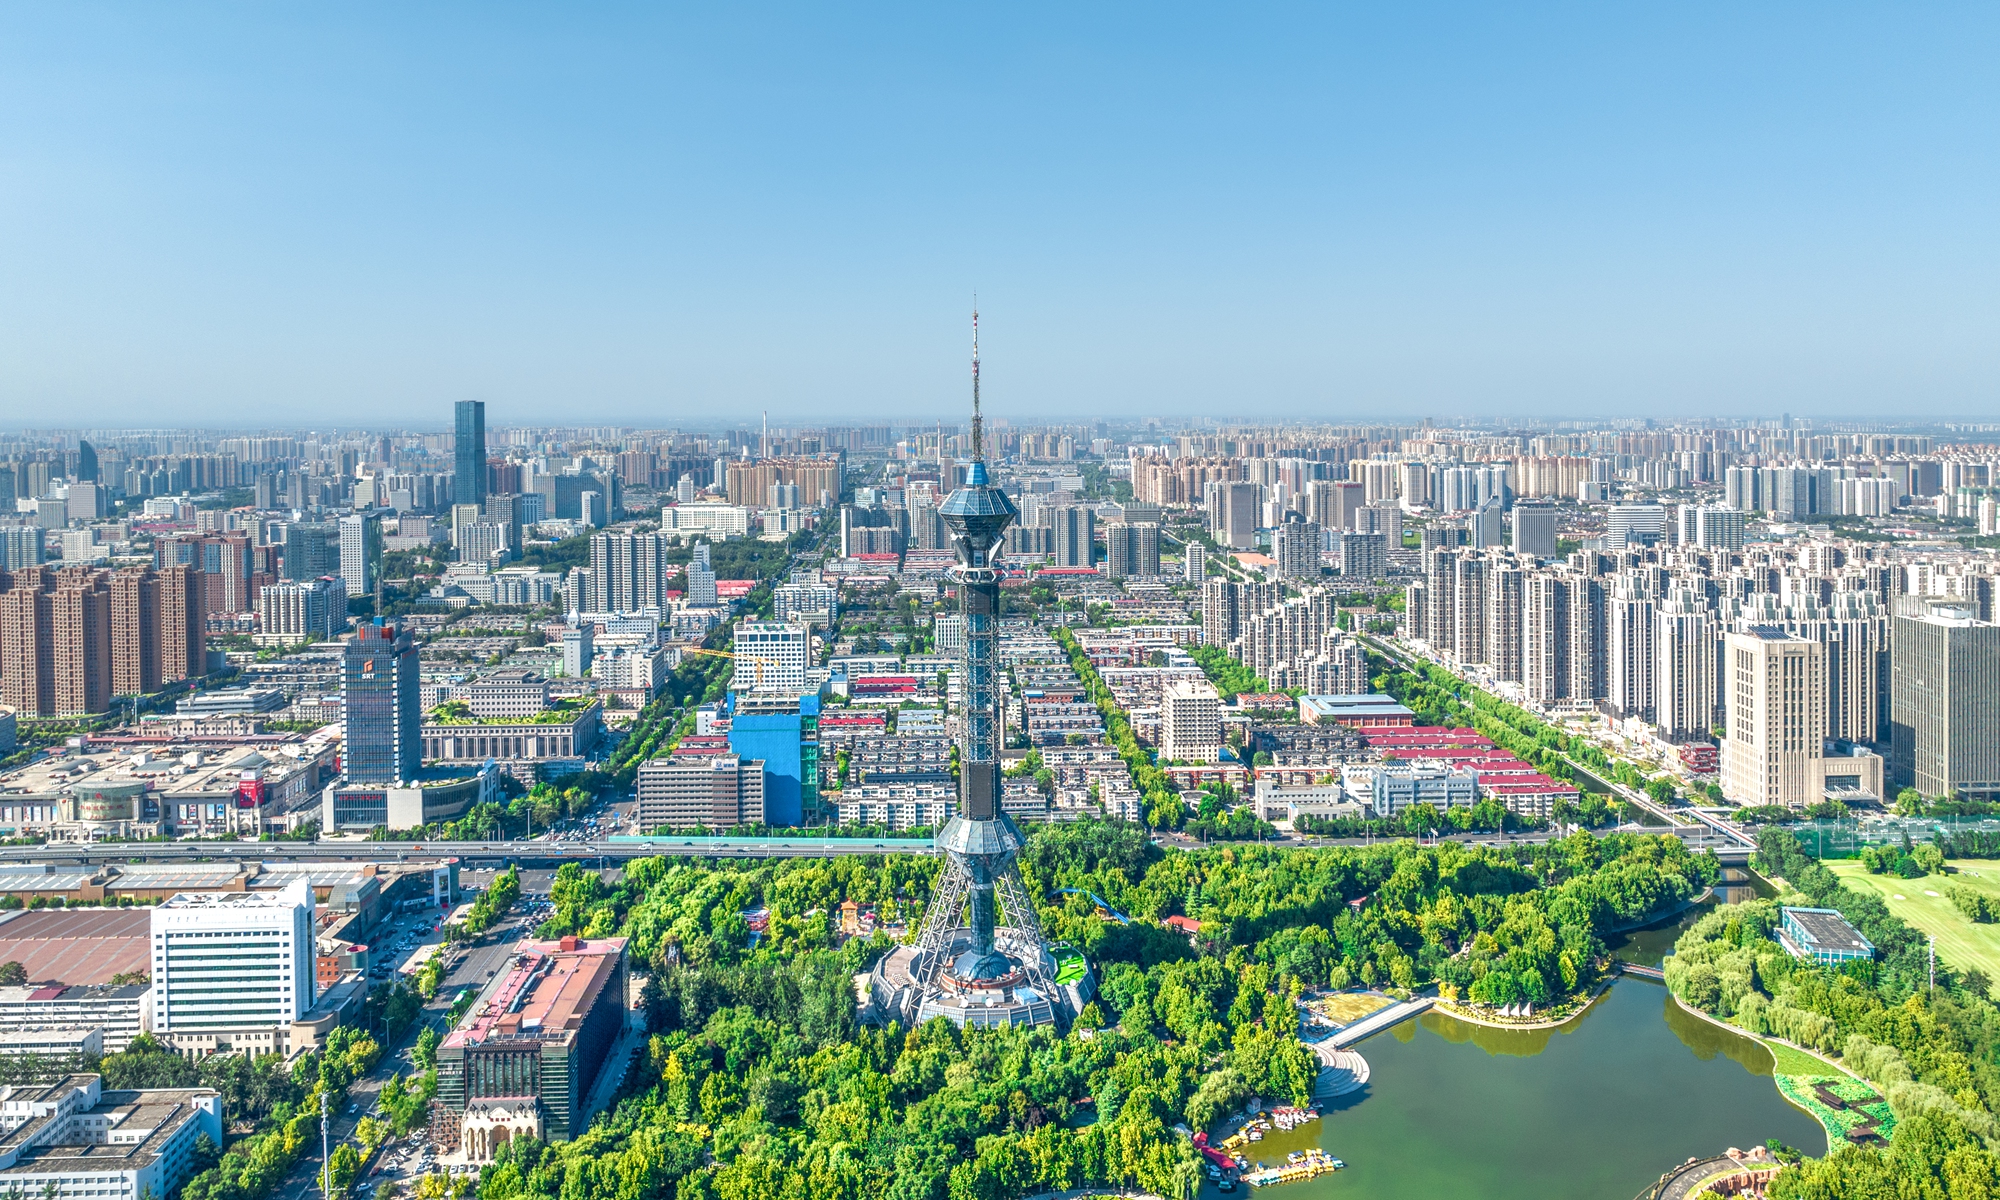 The skyline of Shijiazhuang, North China's Hebei Province Photo: VCG